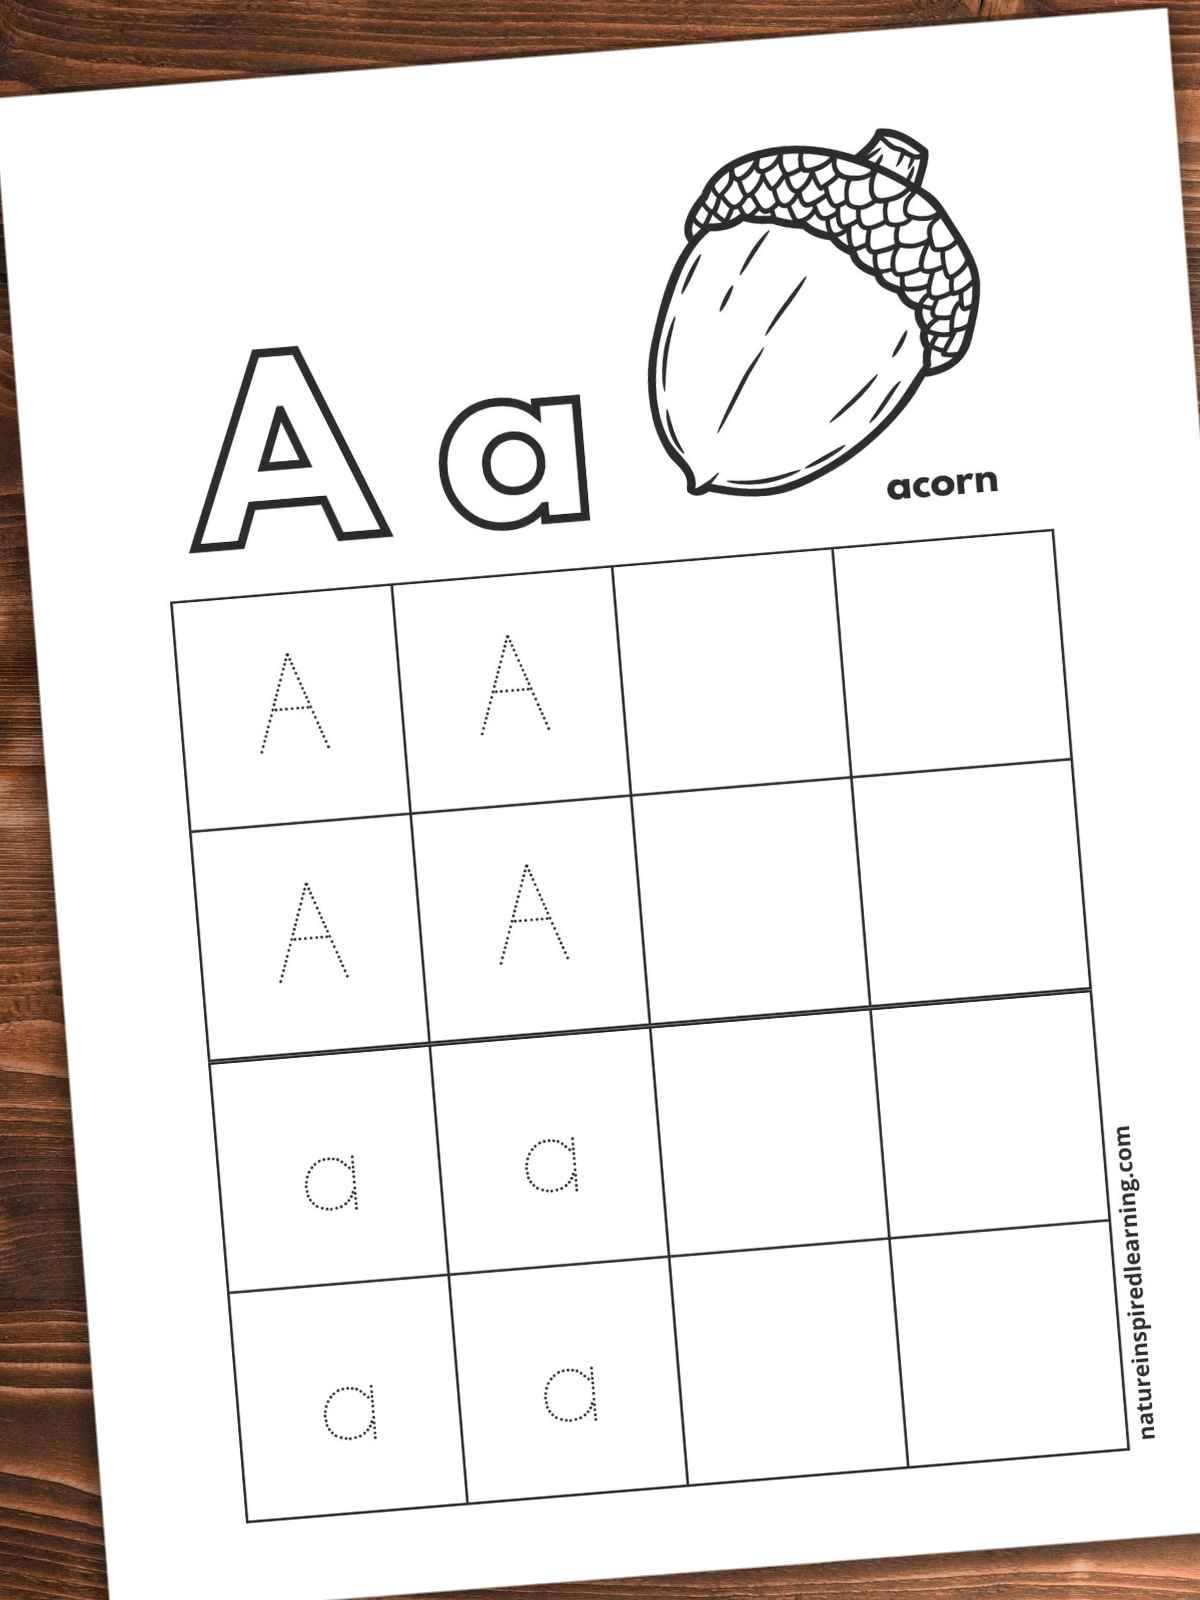 Outlined A and a next to a large black and white image of an acorn with small text next to the image. Four rows and columns of boxes, four with capital letter A written in dots next to four empty boxes. Lowercase letter a in bottom four boxes written in dots to the left of four empty boxes. Worksheet slanted on a wooden background